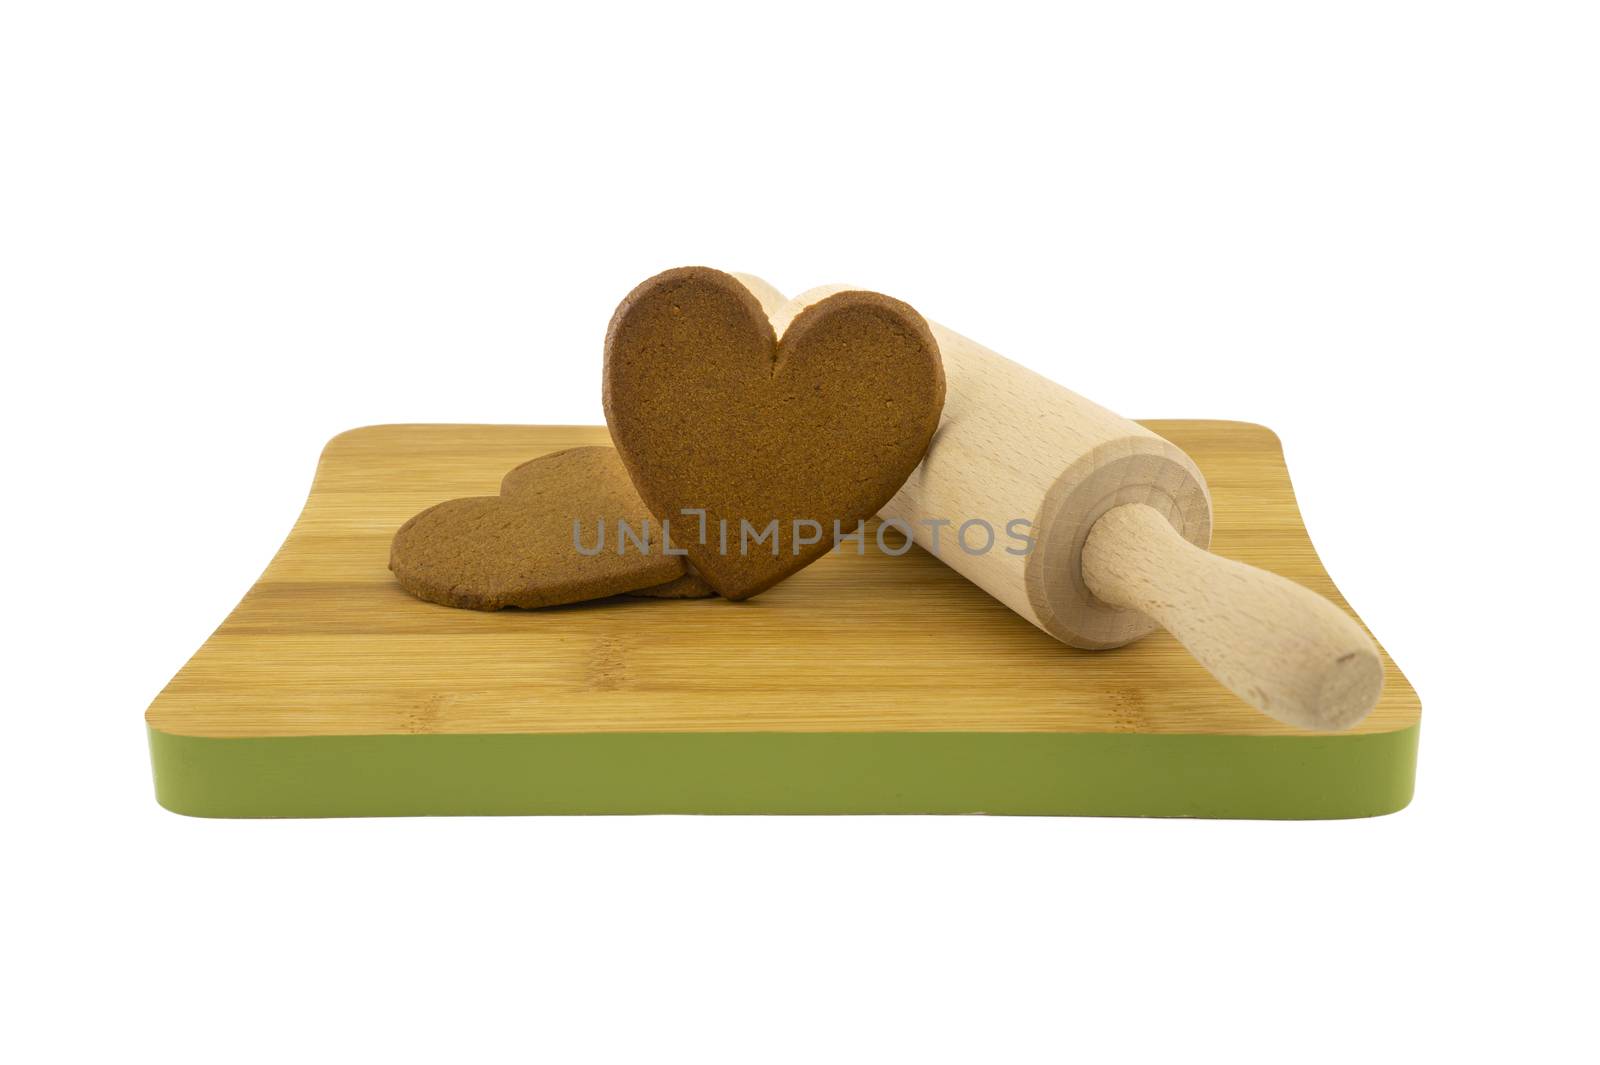 Heart-shaped cookies gift preparation concept with brown biscuits and rolling pin on wooden cutting board isolated on white background